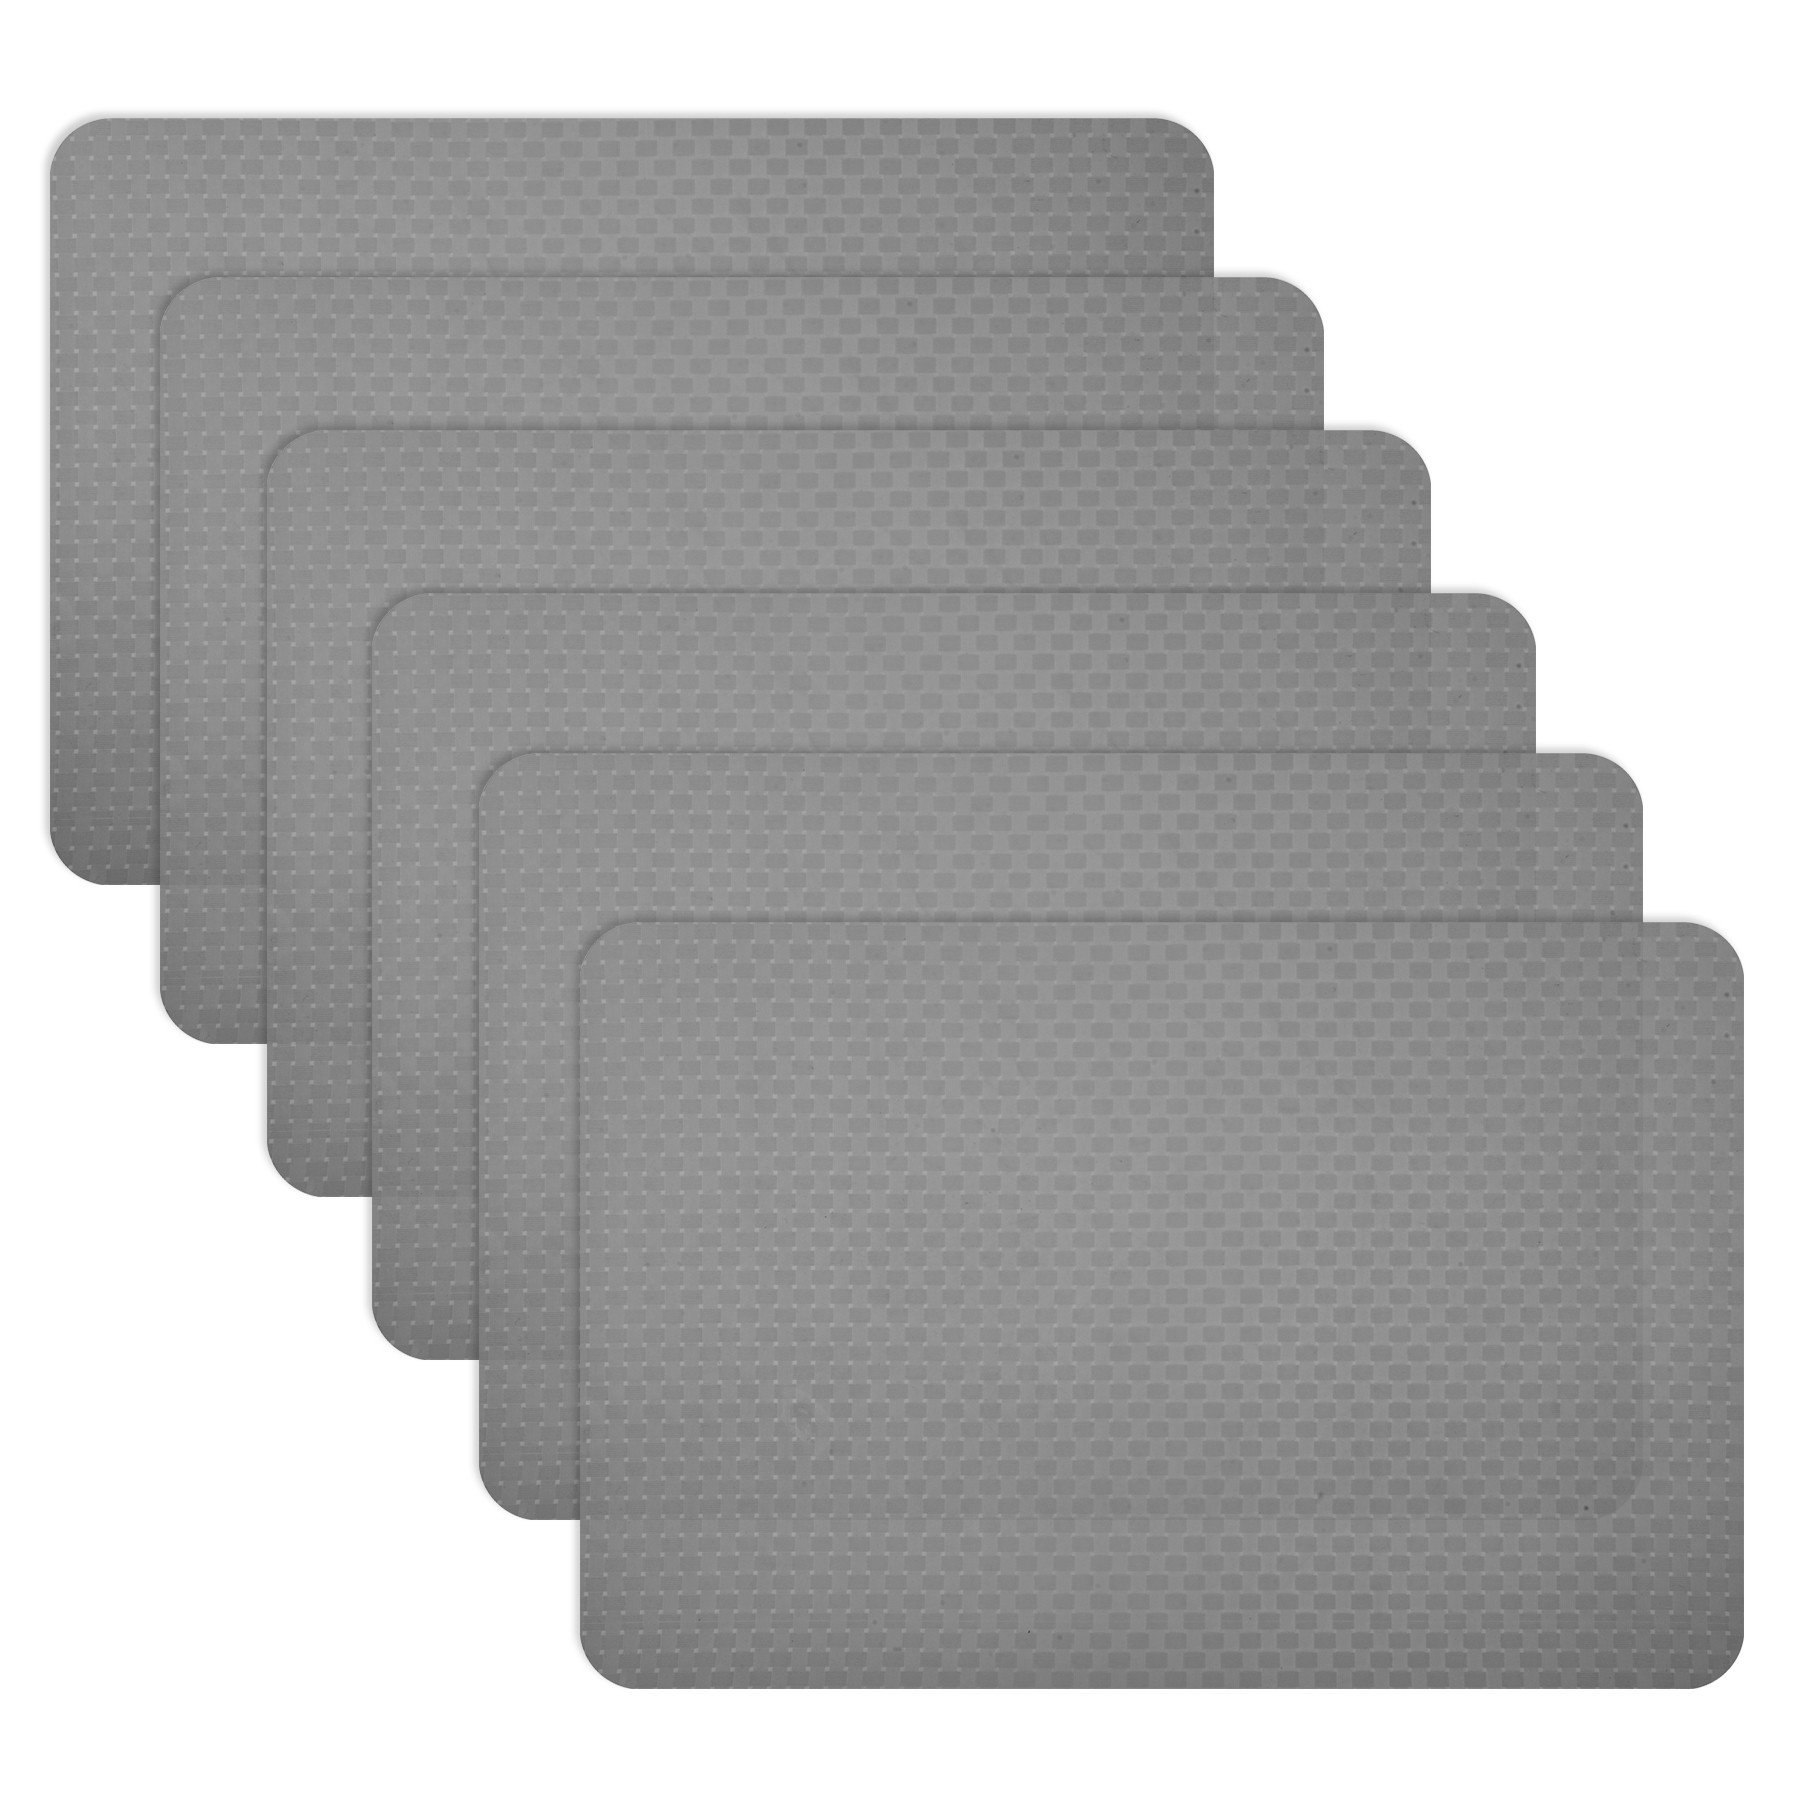 Kuber Industries Placemat | Placemats for Dining Room | Table Mat Set | Placemats for Kitchen Table | Dining Table Placemats | Check-Design Placemat | 6 Piece Set | Gray